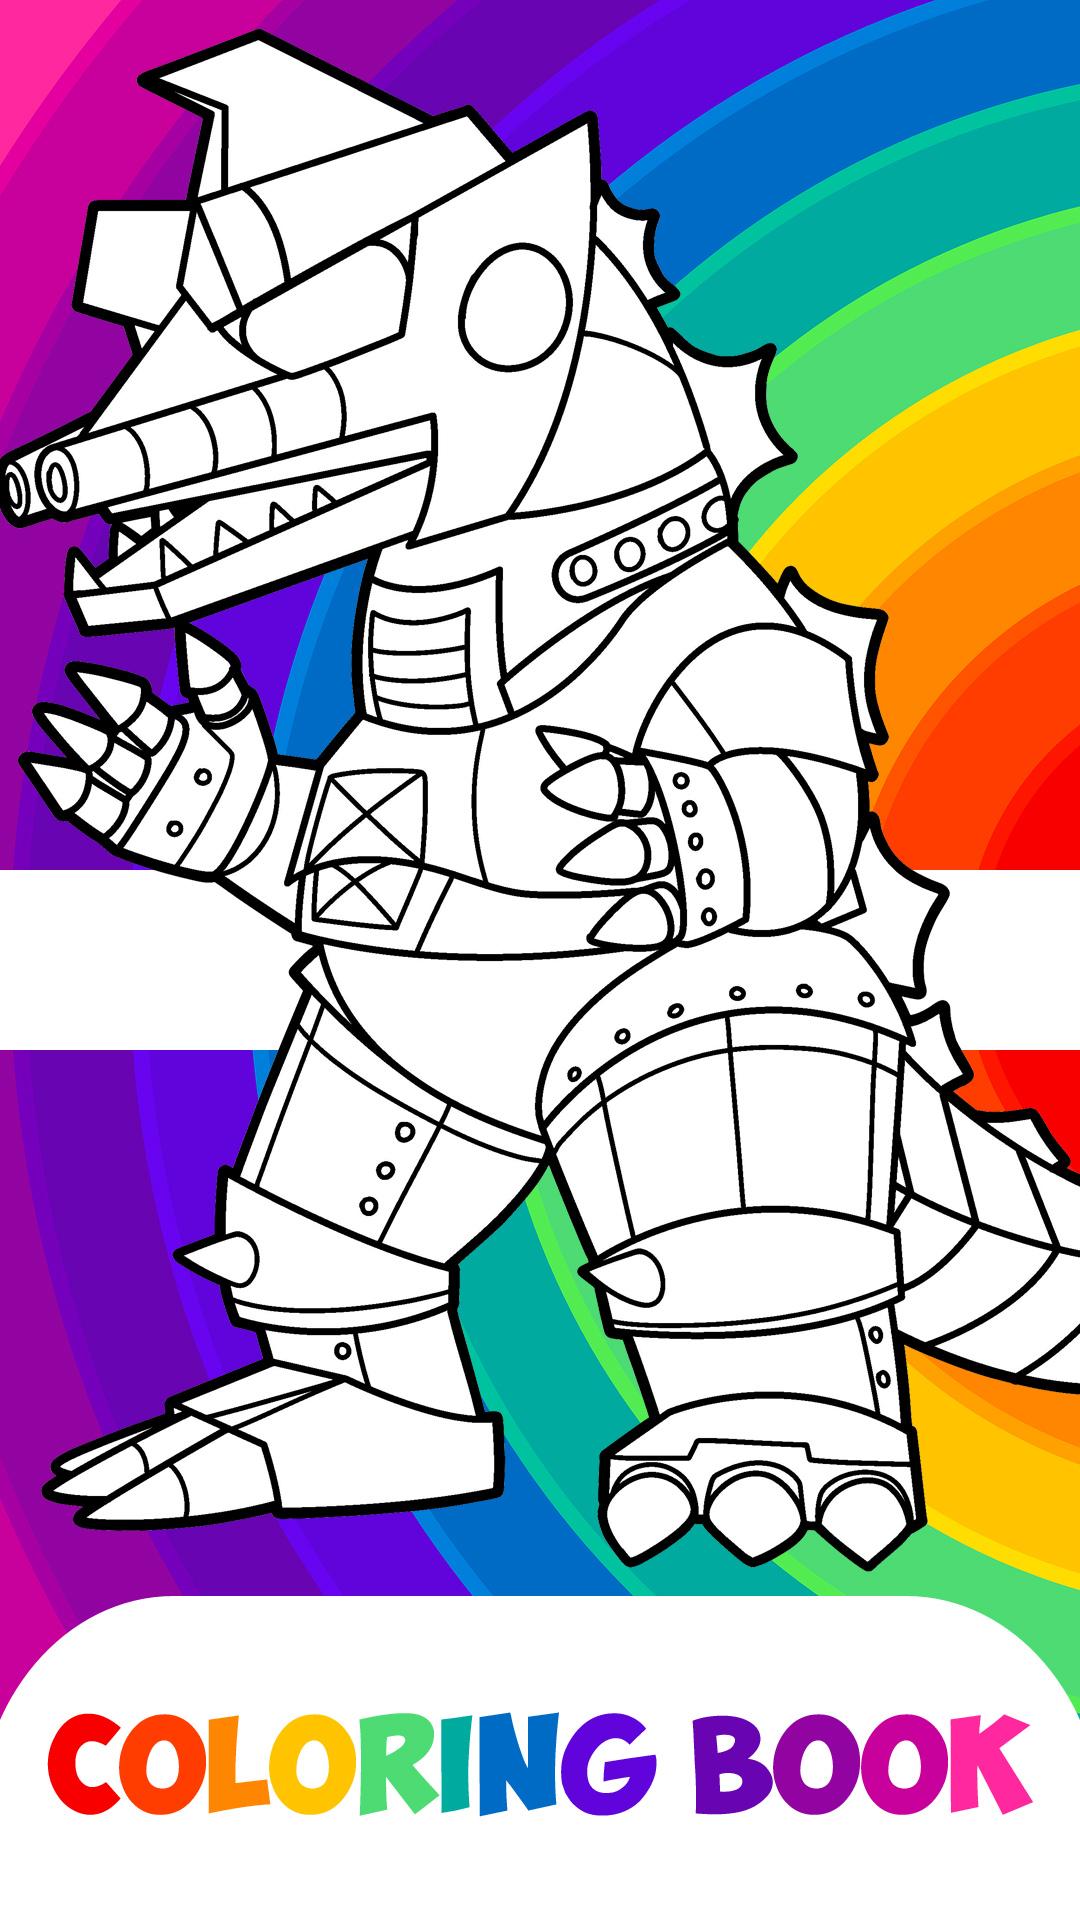 Godzilla coloring book apk for android download